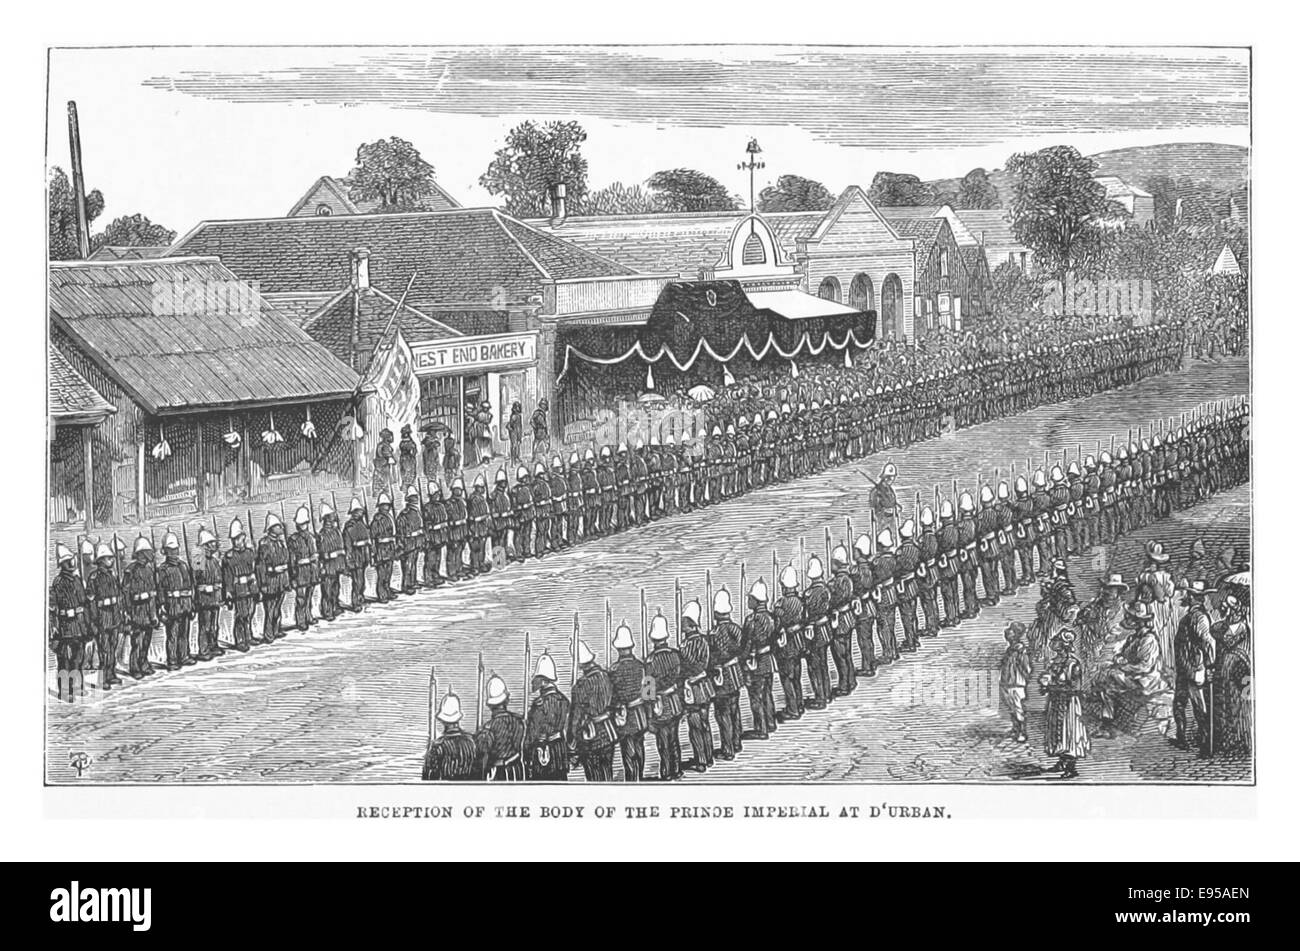 Holden(1879) reception of the body of the prince imperial at durban Stock Photo